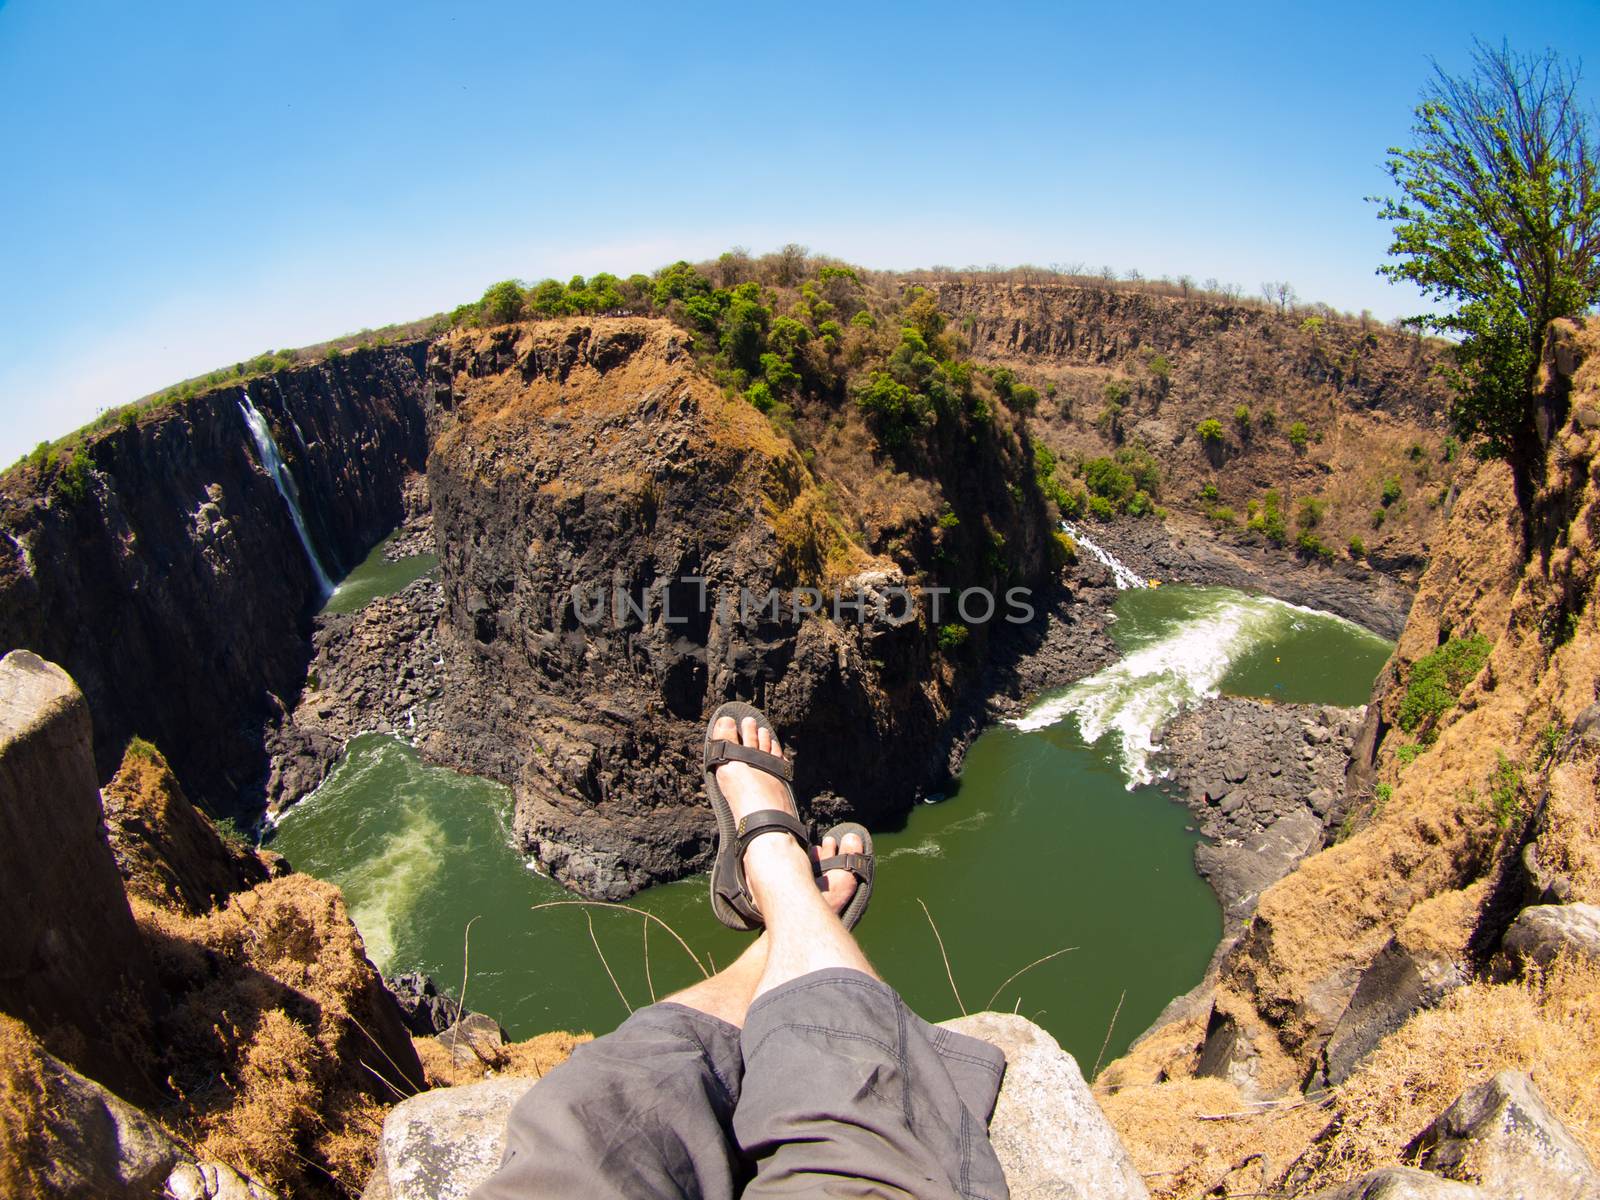 Having a rest at Victoria falls in dry season (fish-eye view)